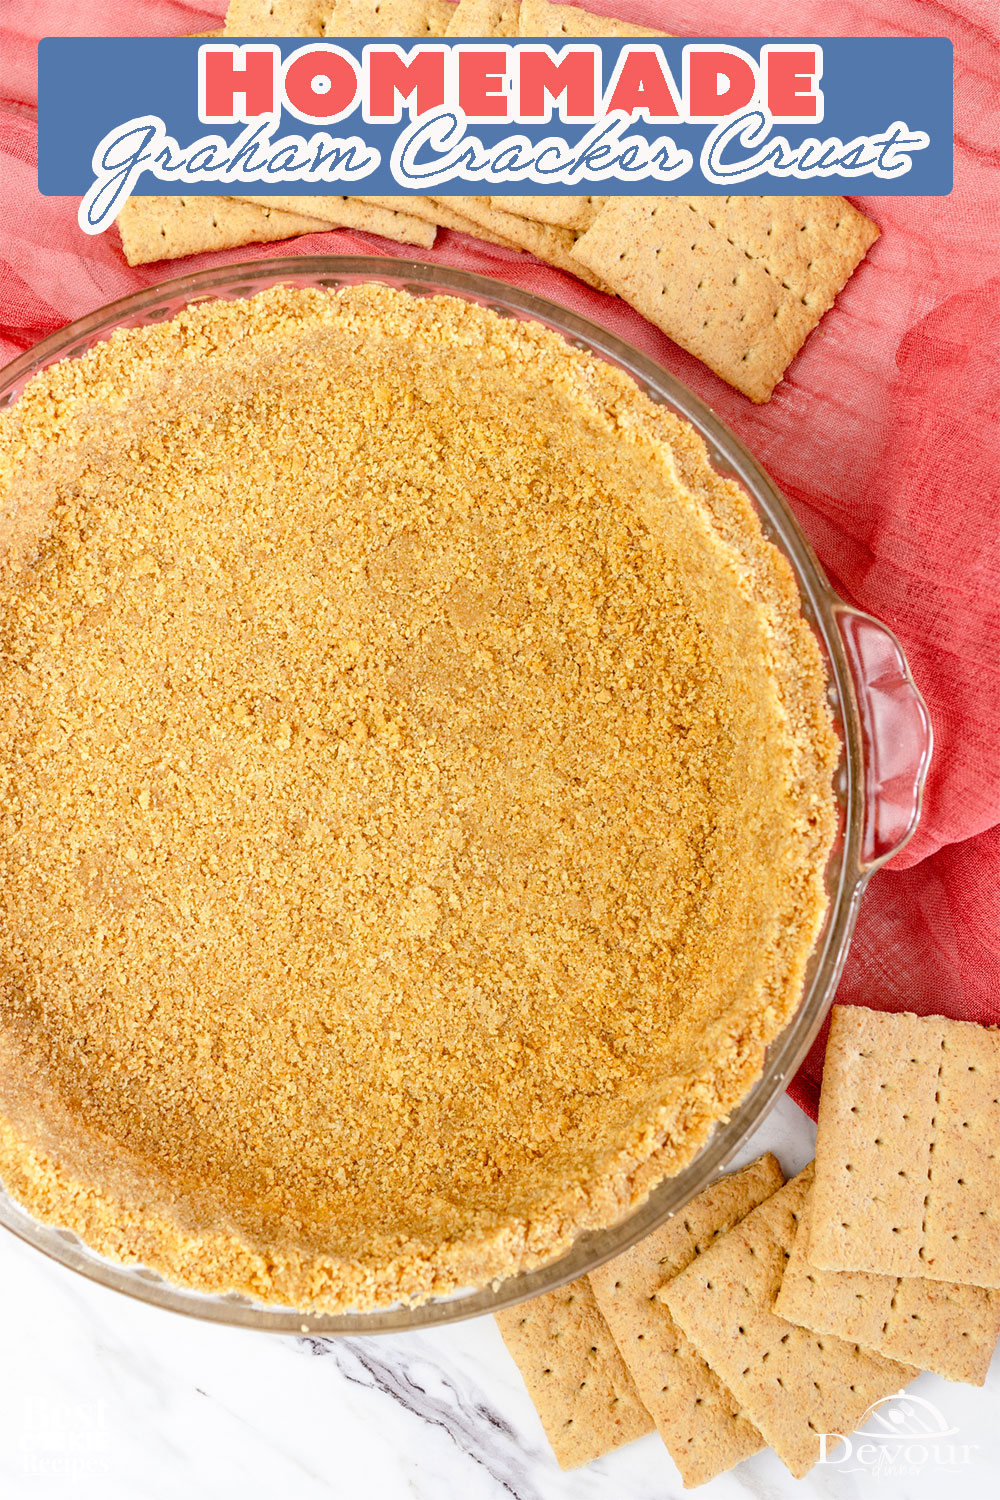 This super easy Homemade Graham Cracker Crust is perfect for pies, cookie bars, cheesecakes, and so many other delicious dessert recipes. It's one of (if not THE) easiest crust recipes to make and tastes way better than store-bought crusts!